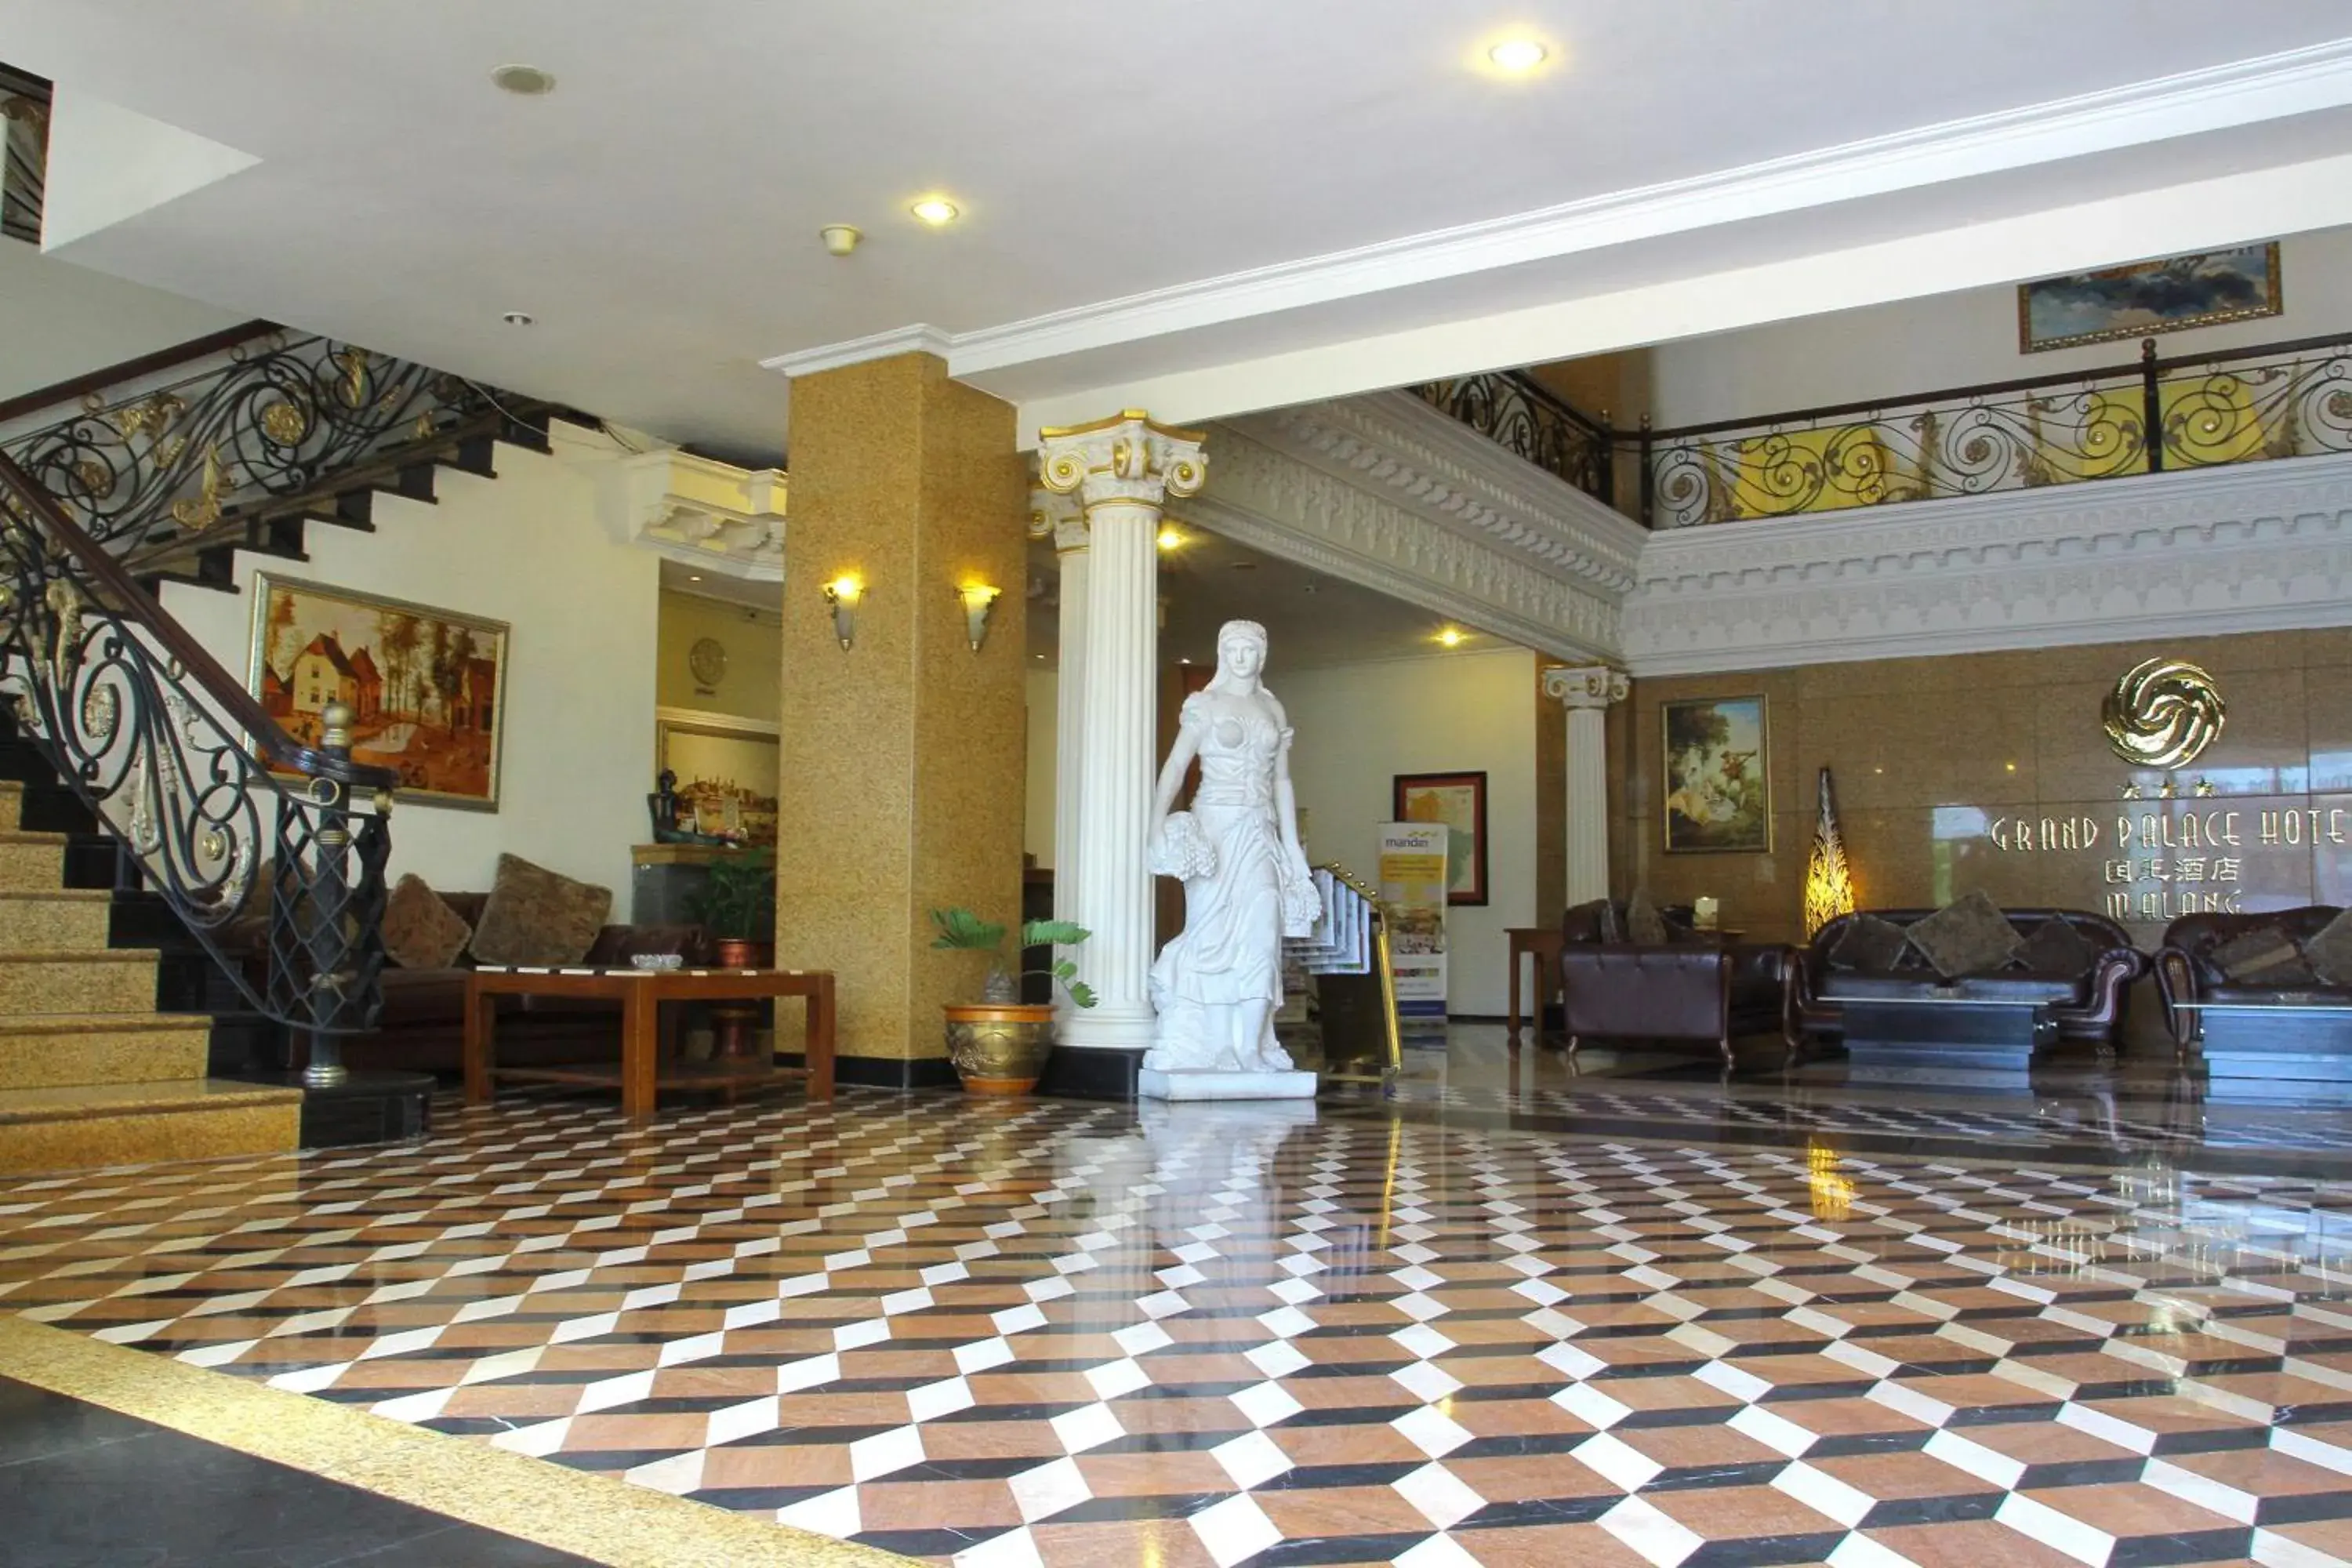 Lobby or reception, Lobby/Reception in The Grand Palace Hotel Malang